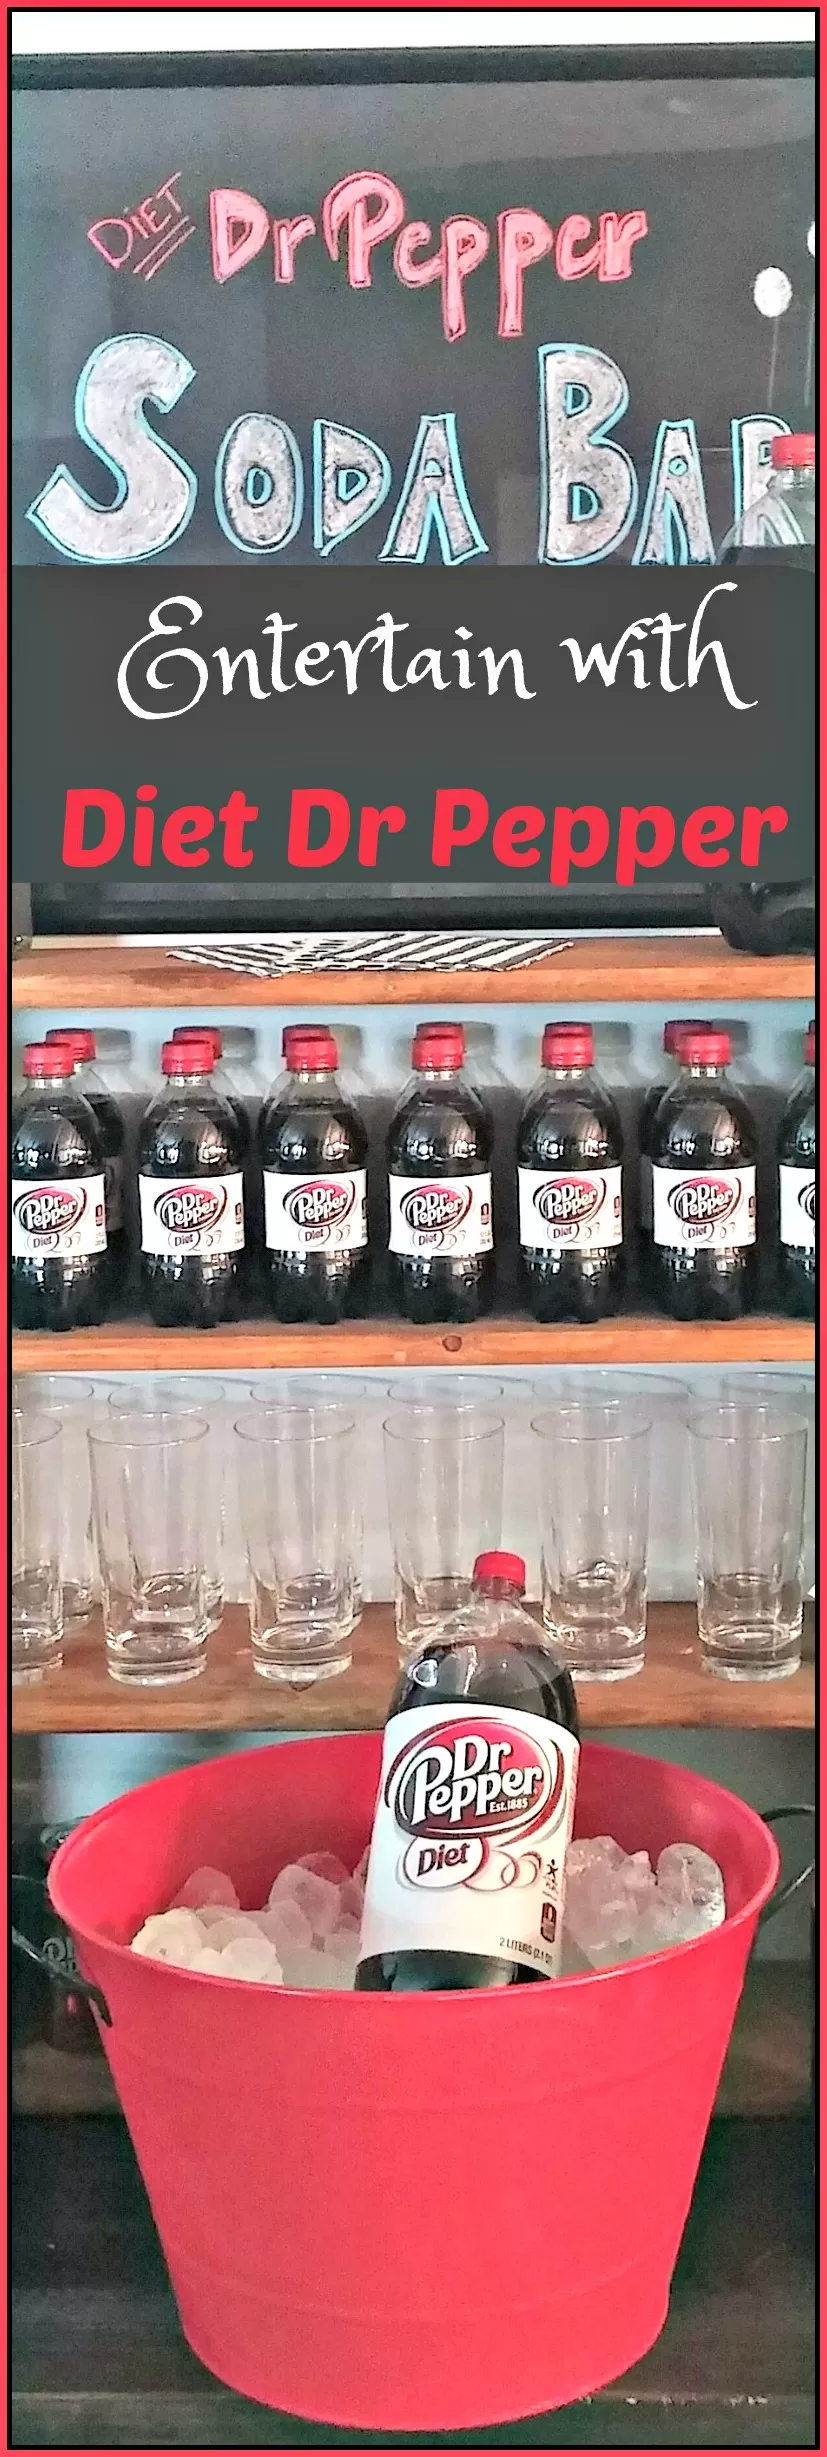 Diet Dr Pepper cropped